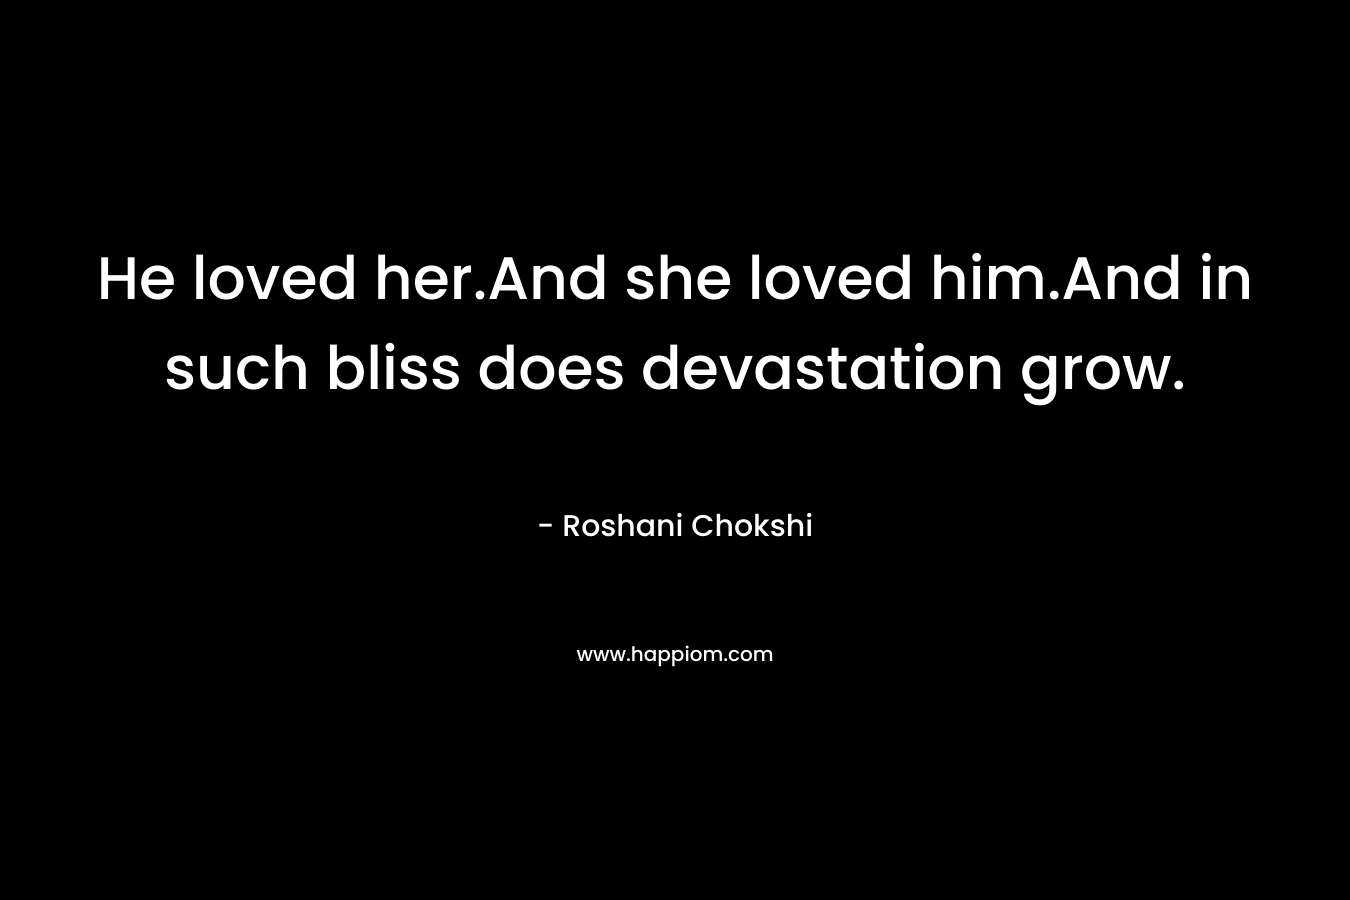 He loved her.And she loved him.And in such bliss does devastation grow.